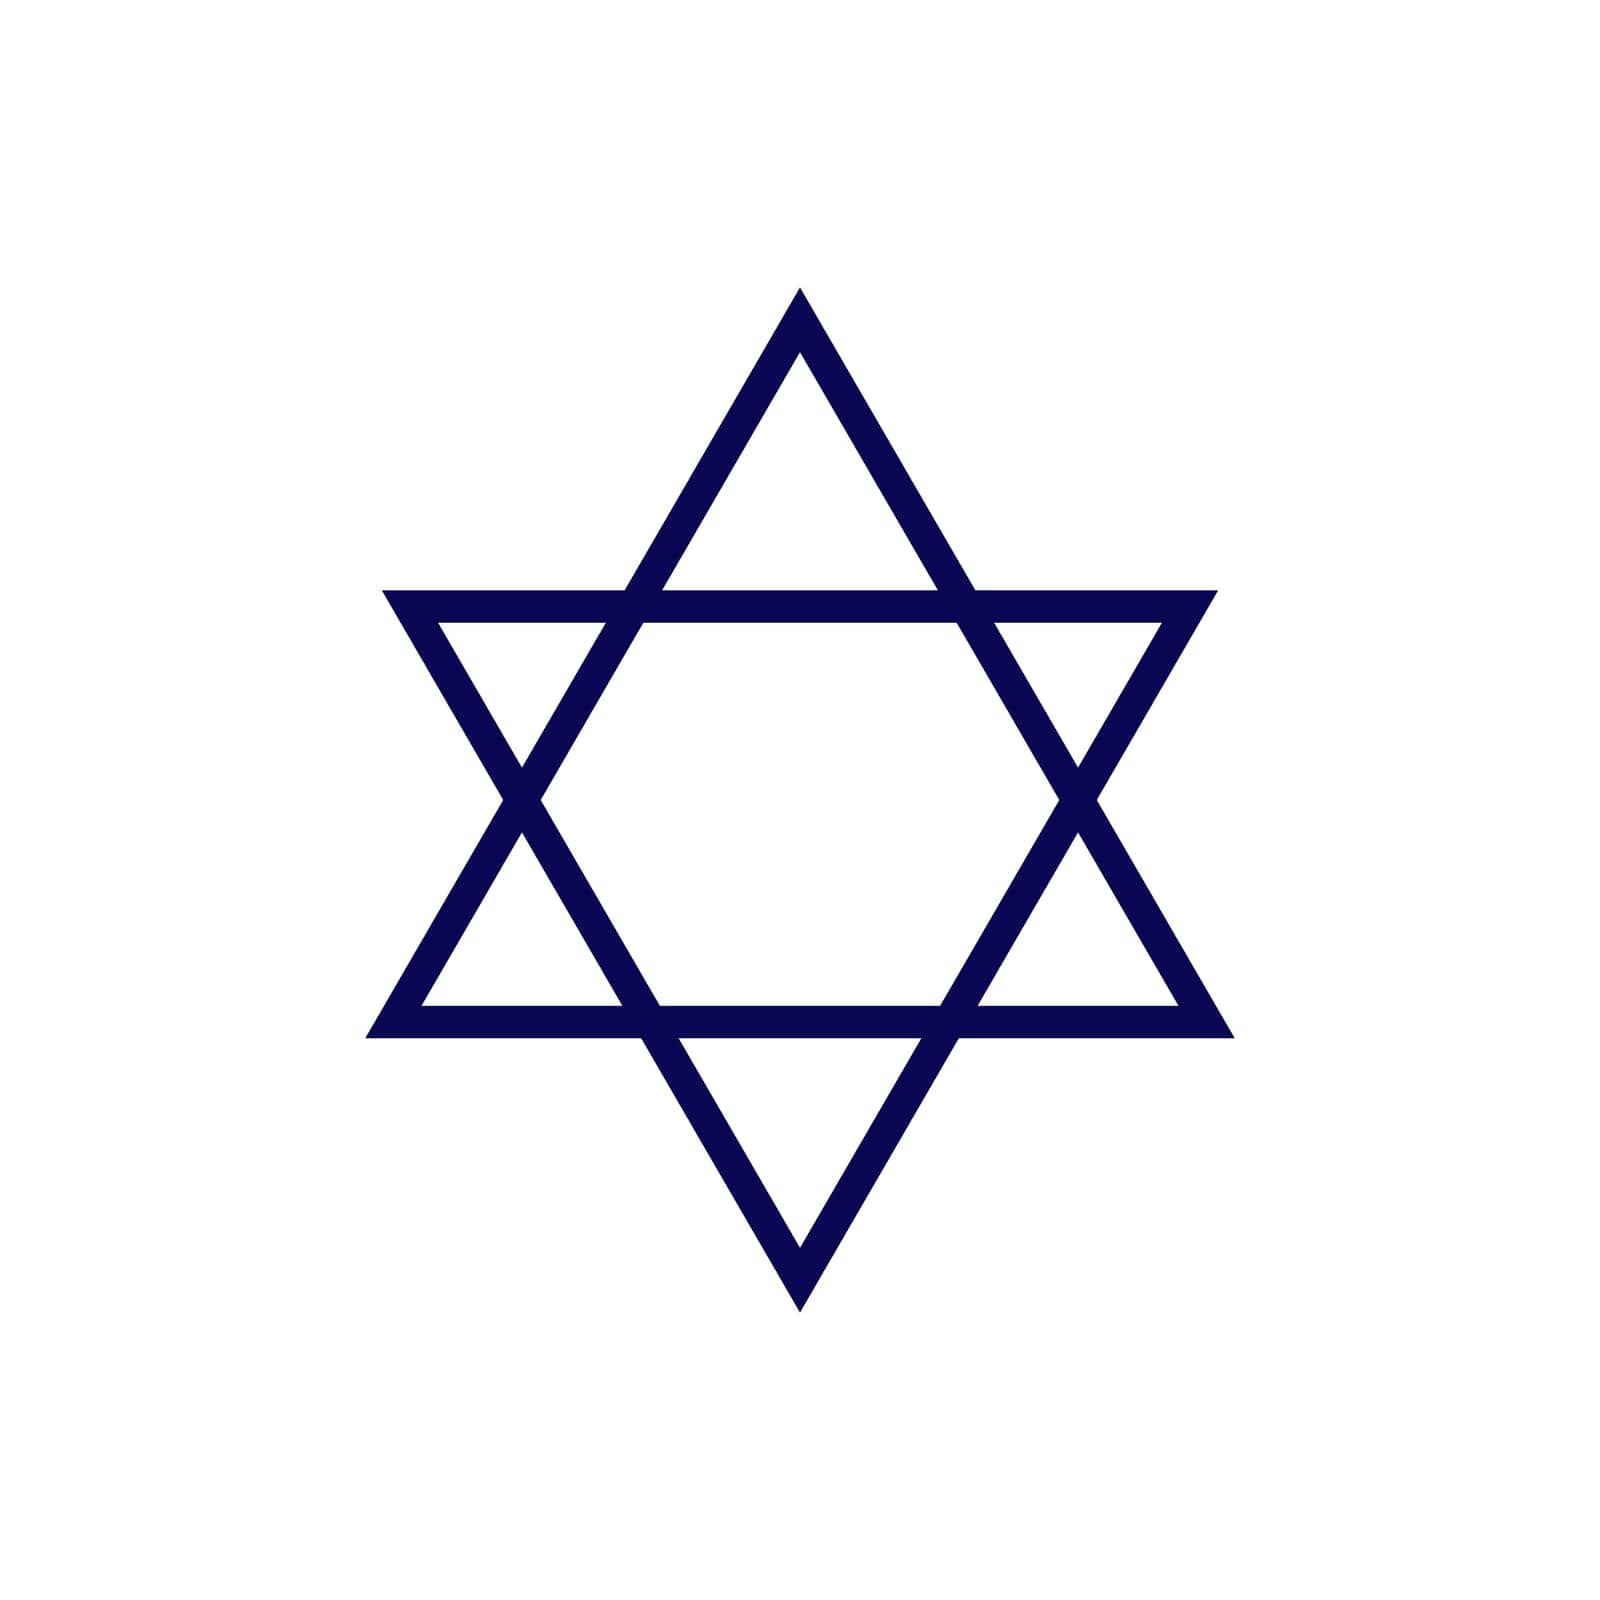 astrological symbol of a six-pointed star by Dustick